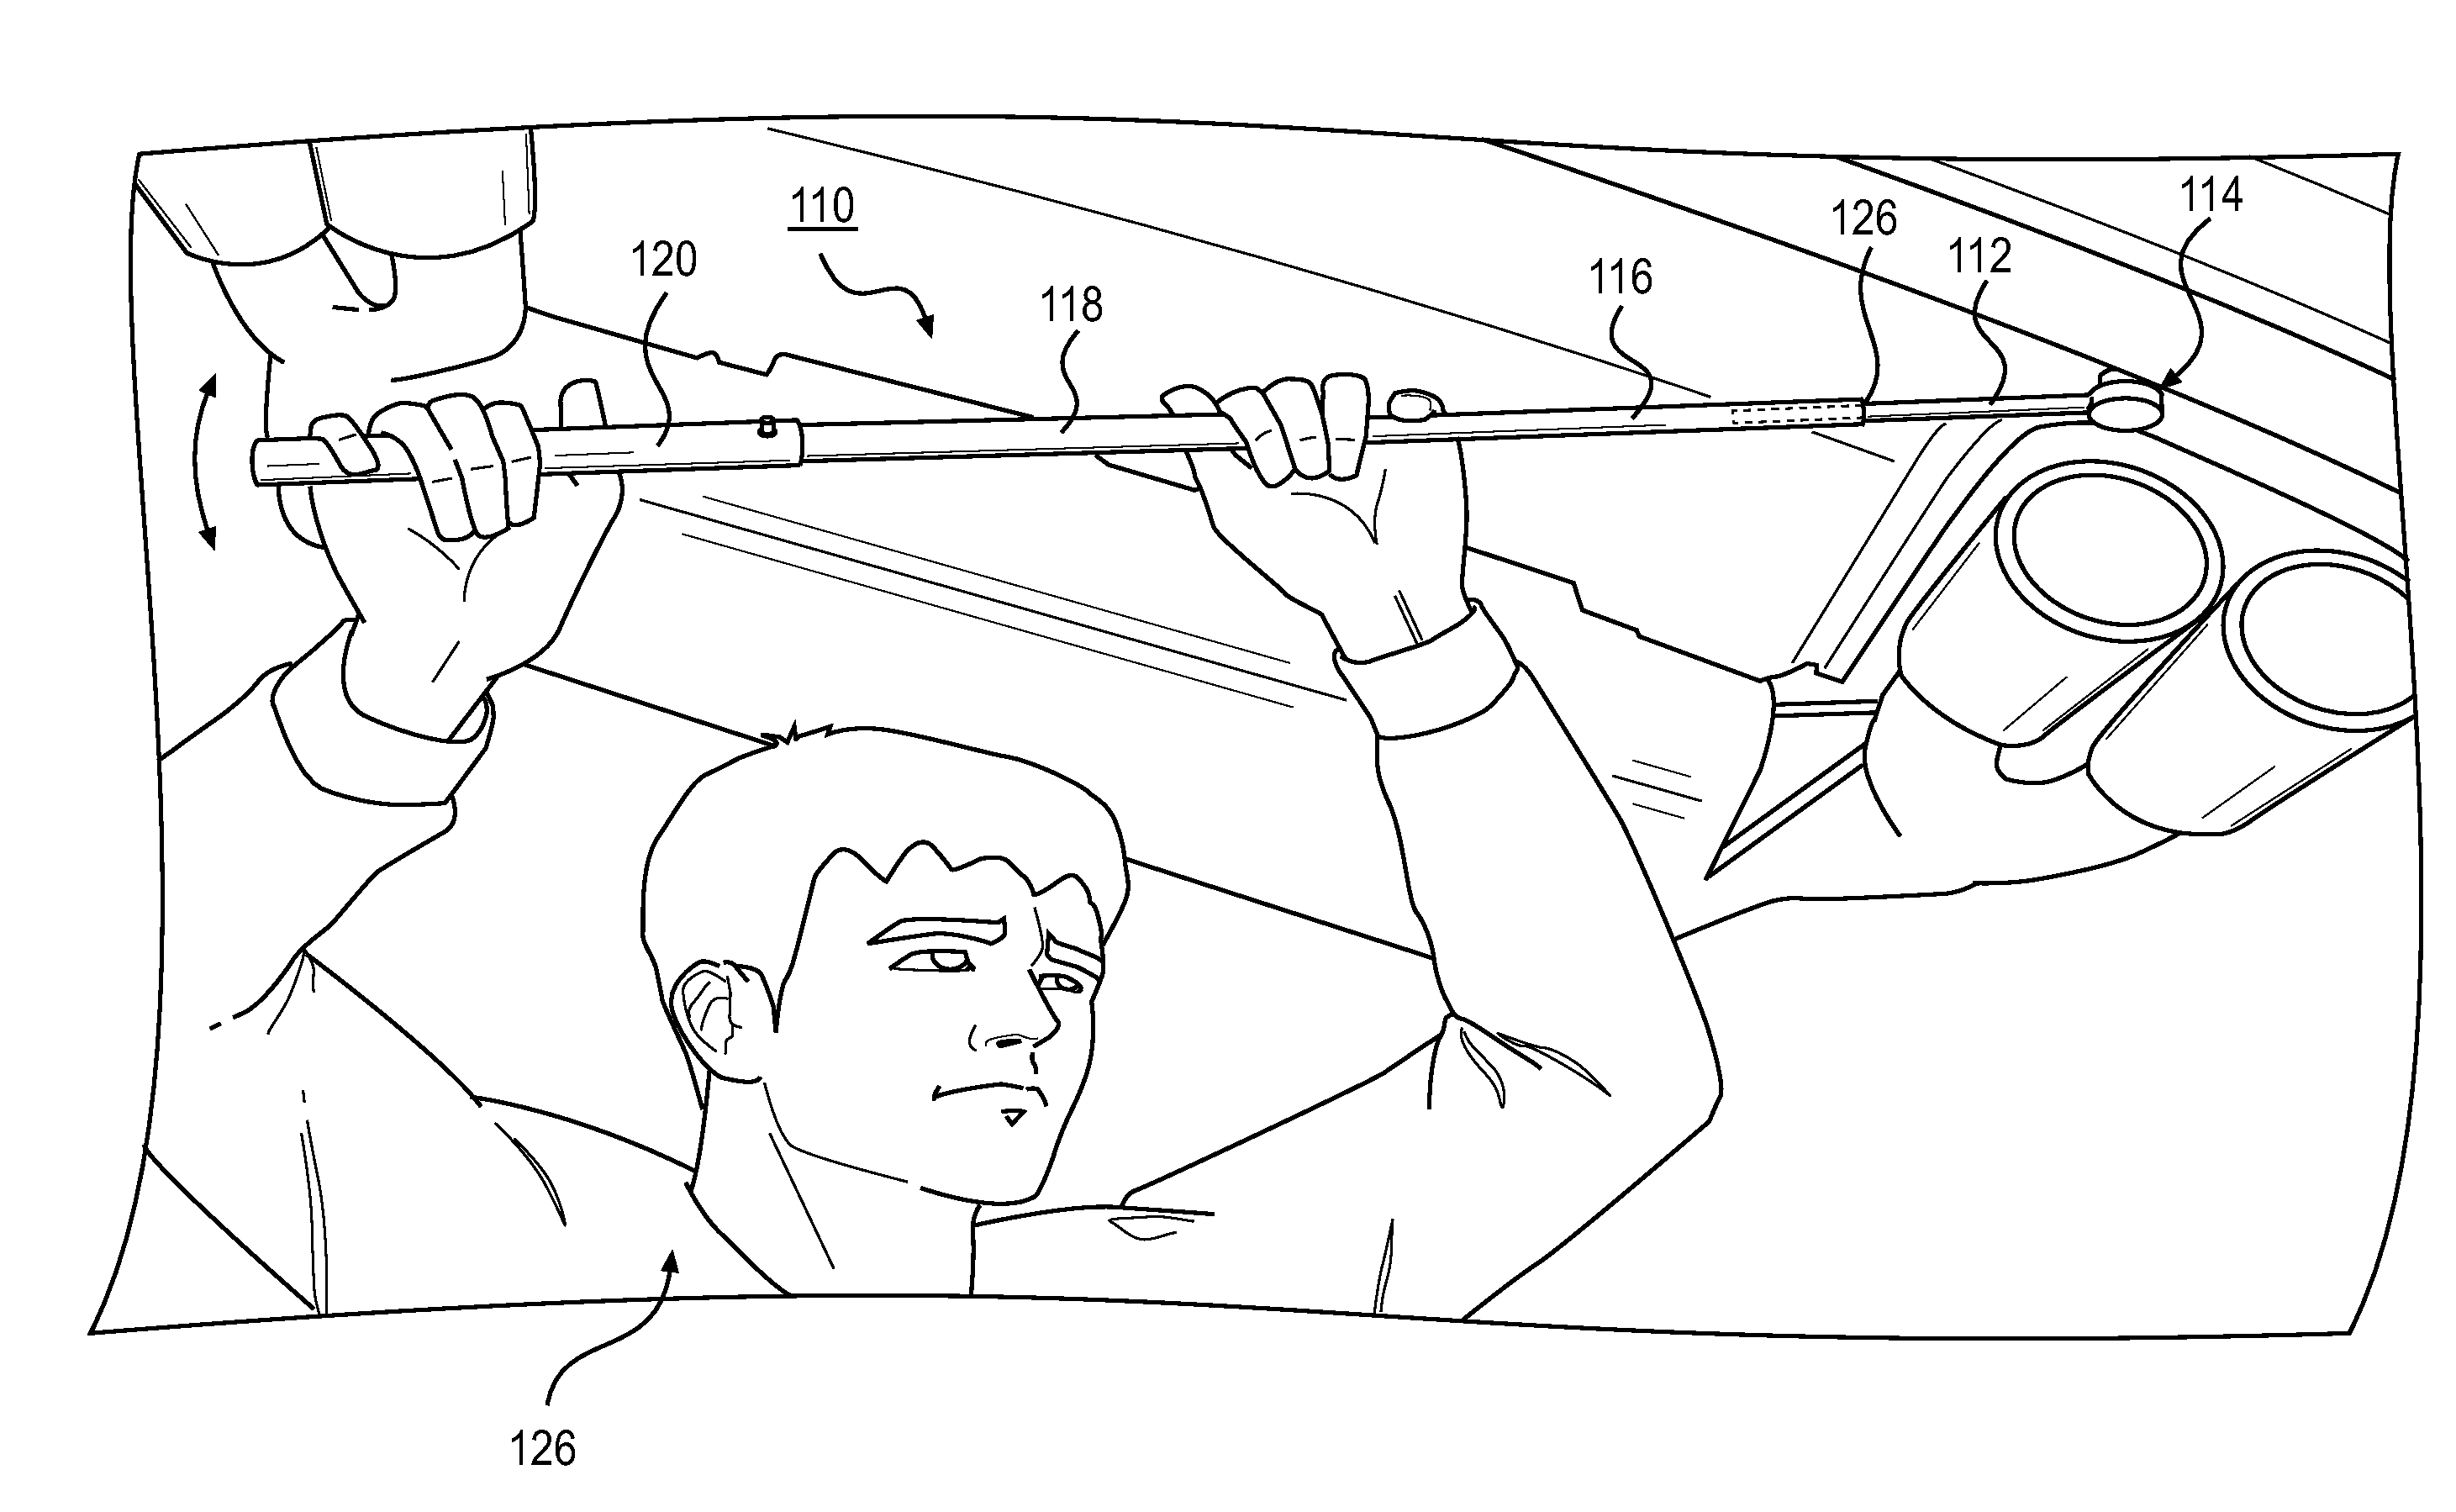 Telescopic extension device for a handle of a wrench